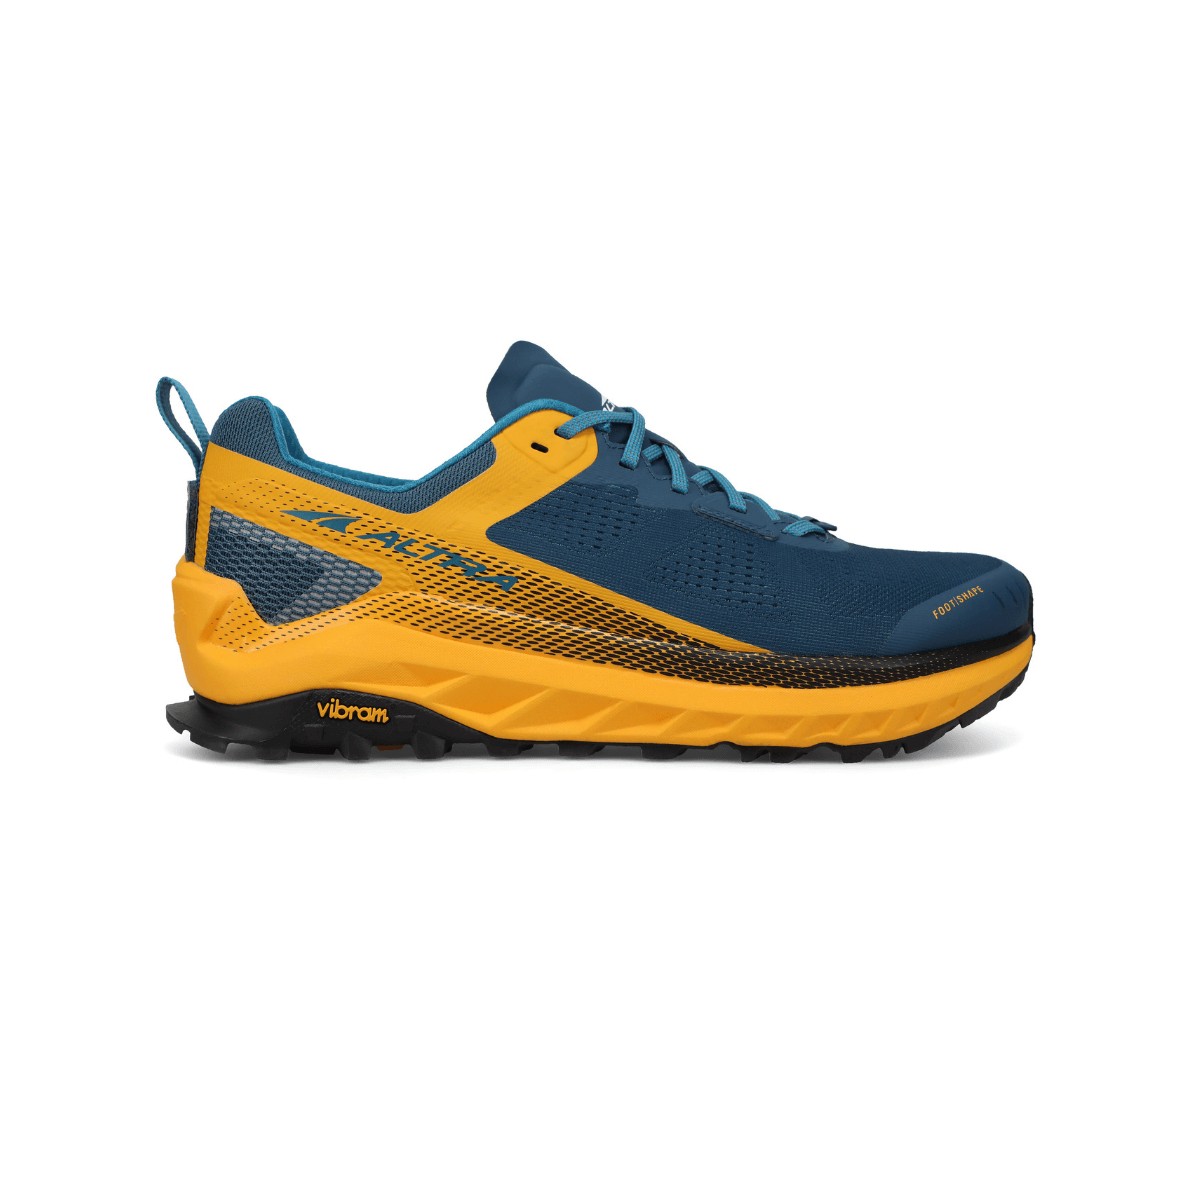 Altra Olympus 4 Shoes Blue Yellow AW21, Size 42 - EUR